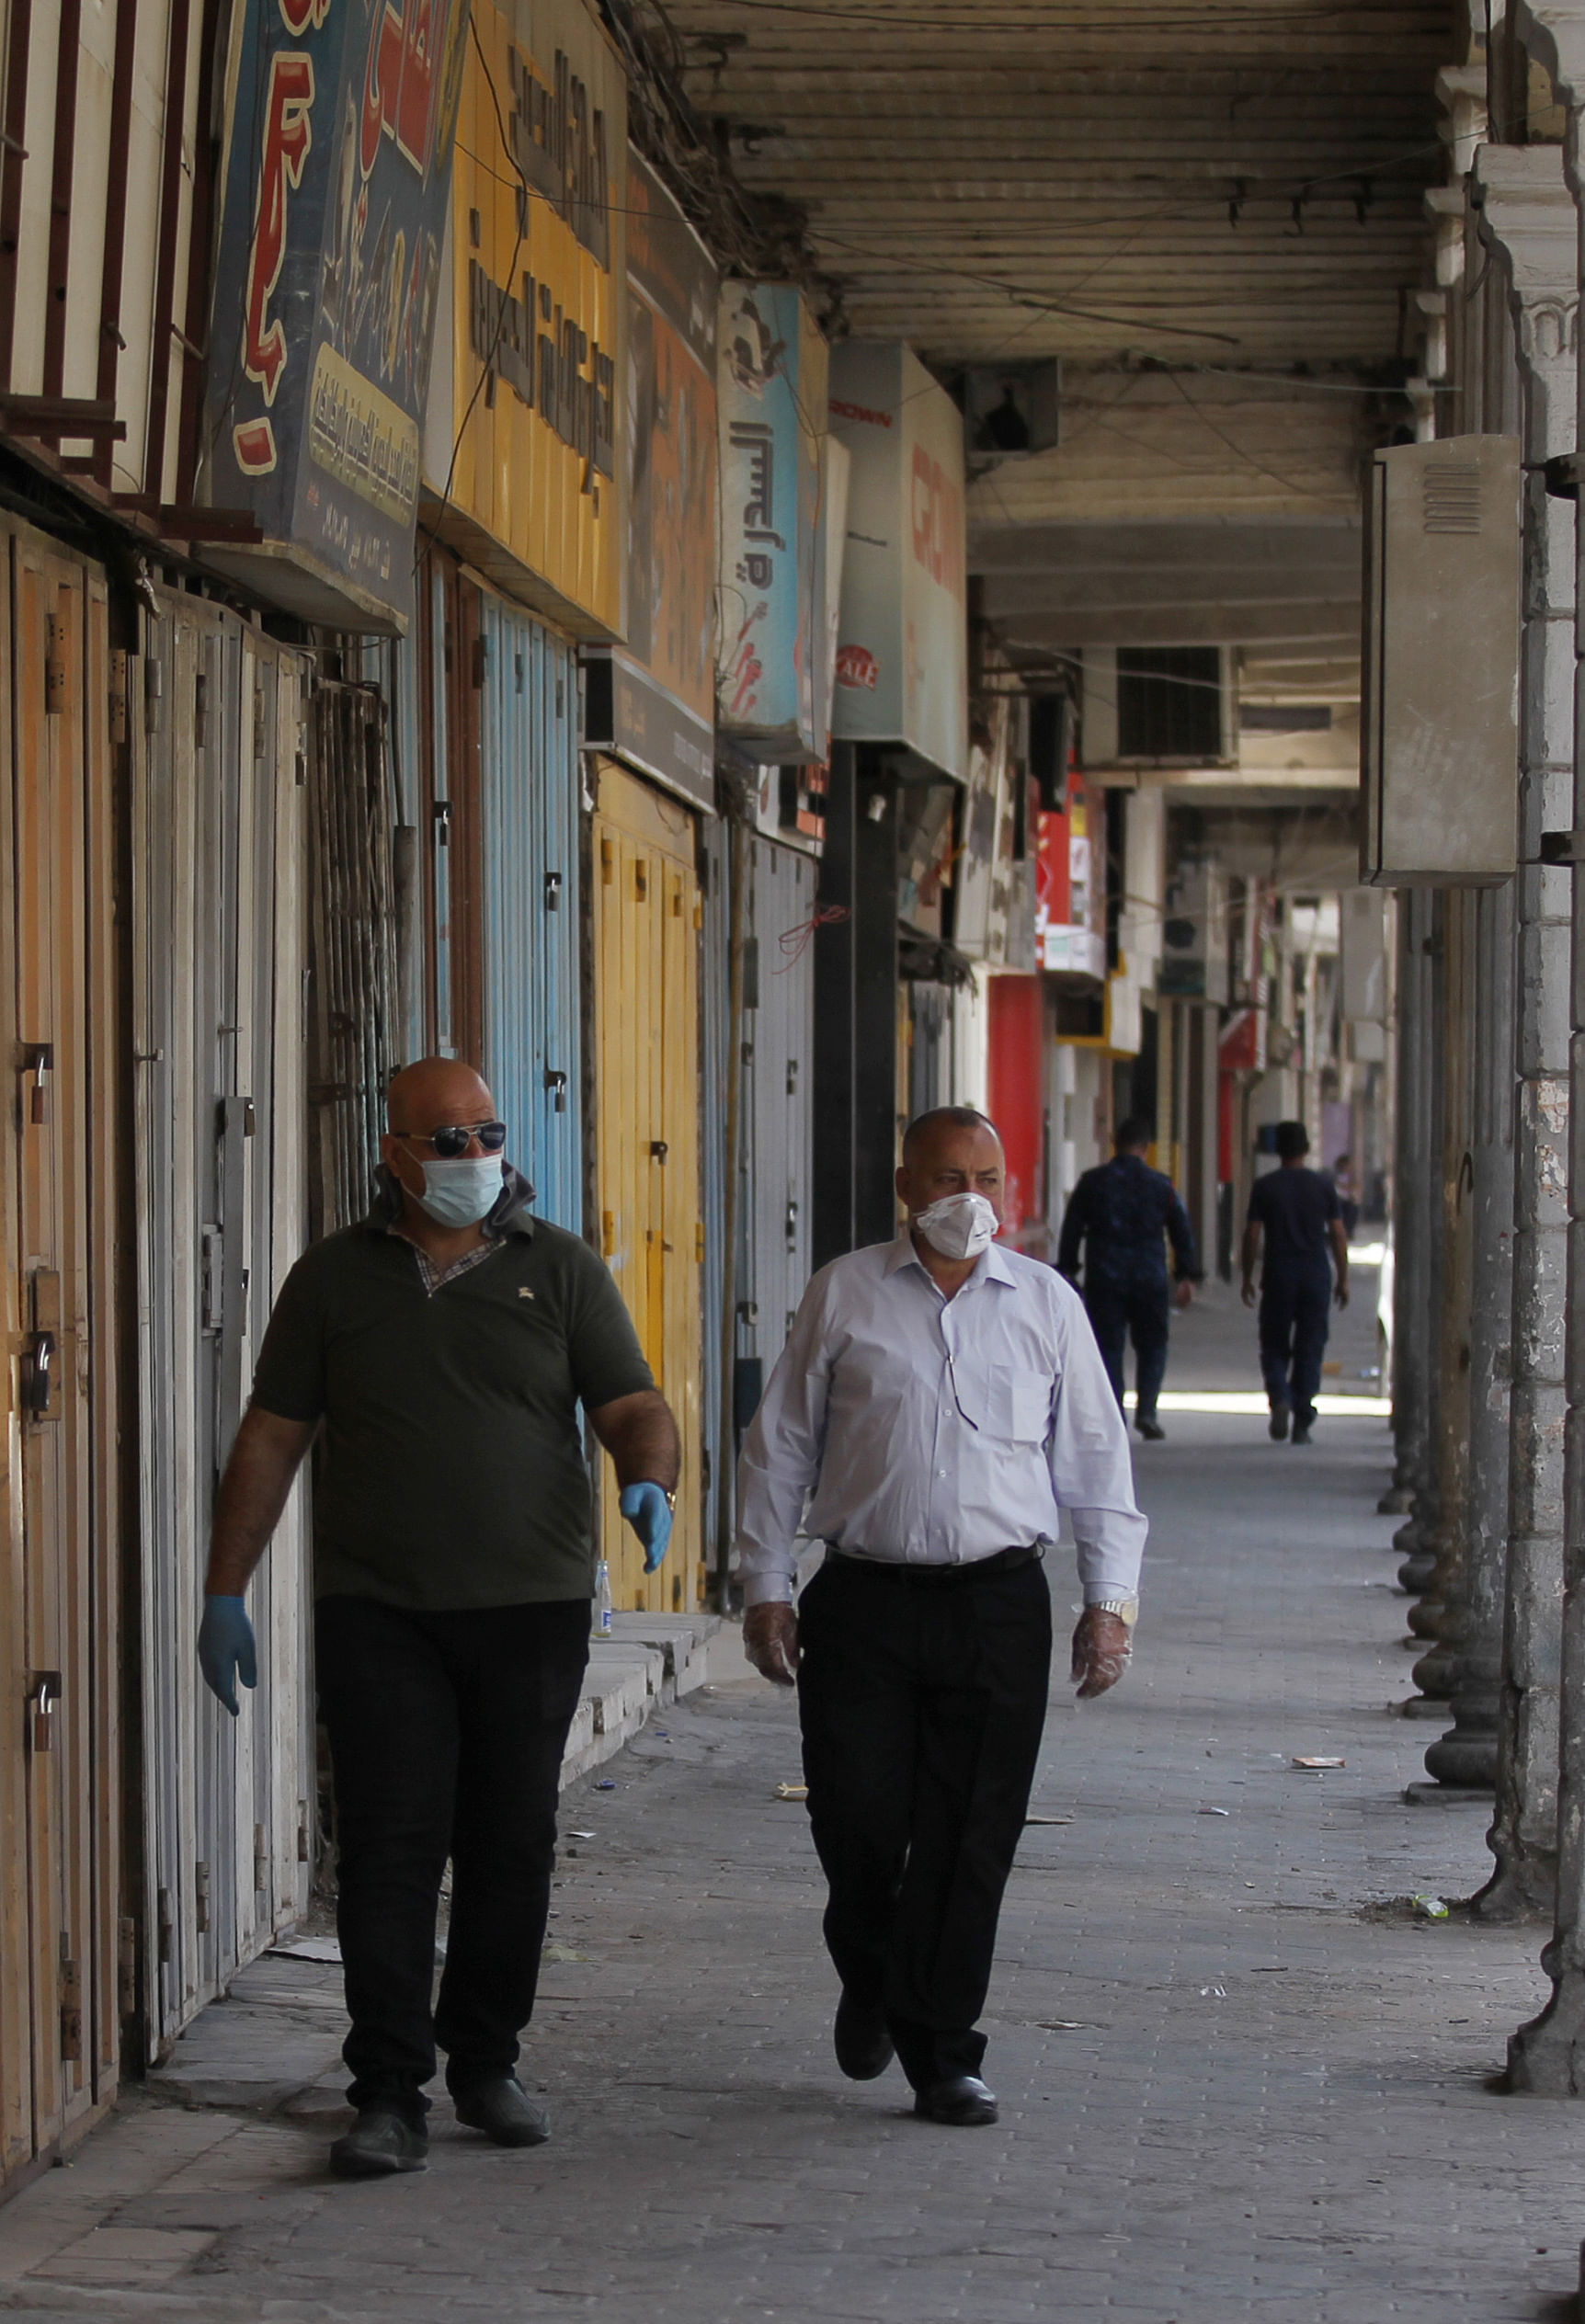 Iraqi men wearing protective masks walk through an empty commercial street. Credits: AFP Photo